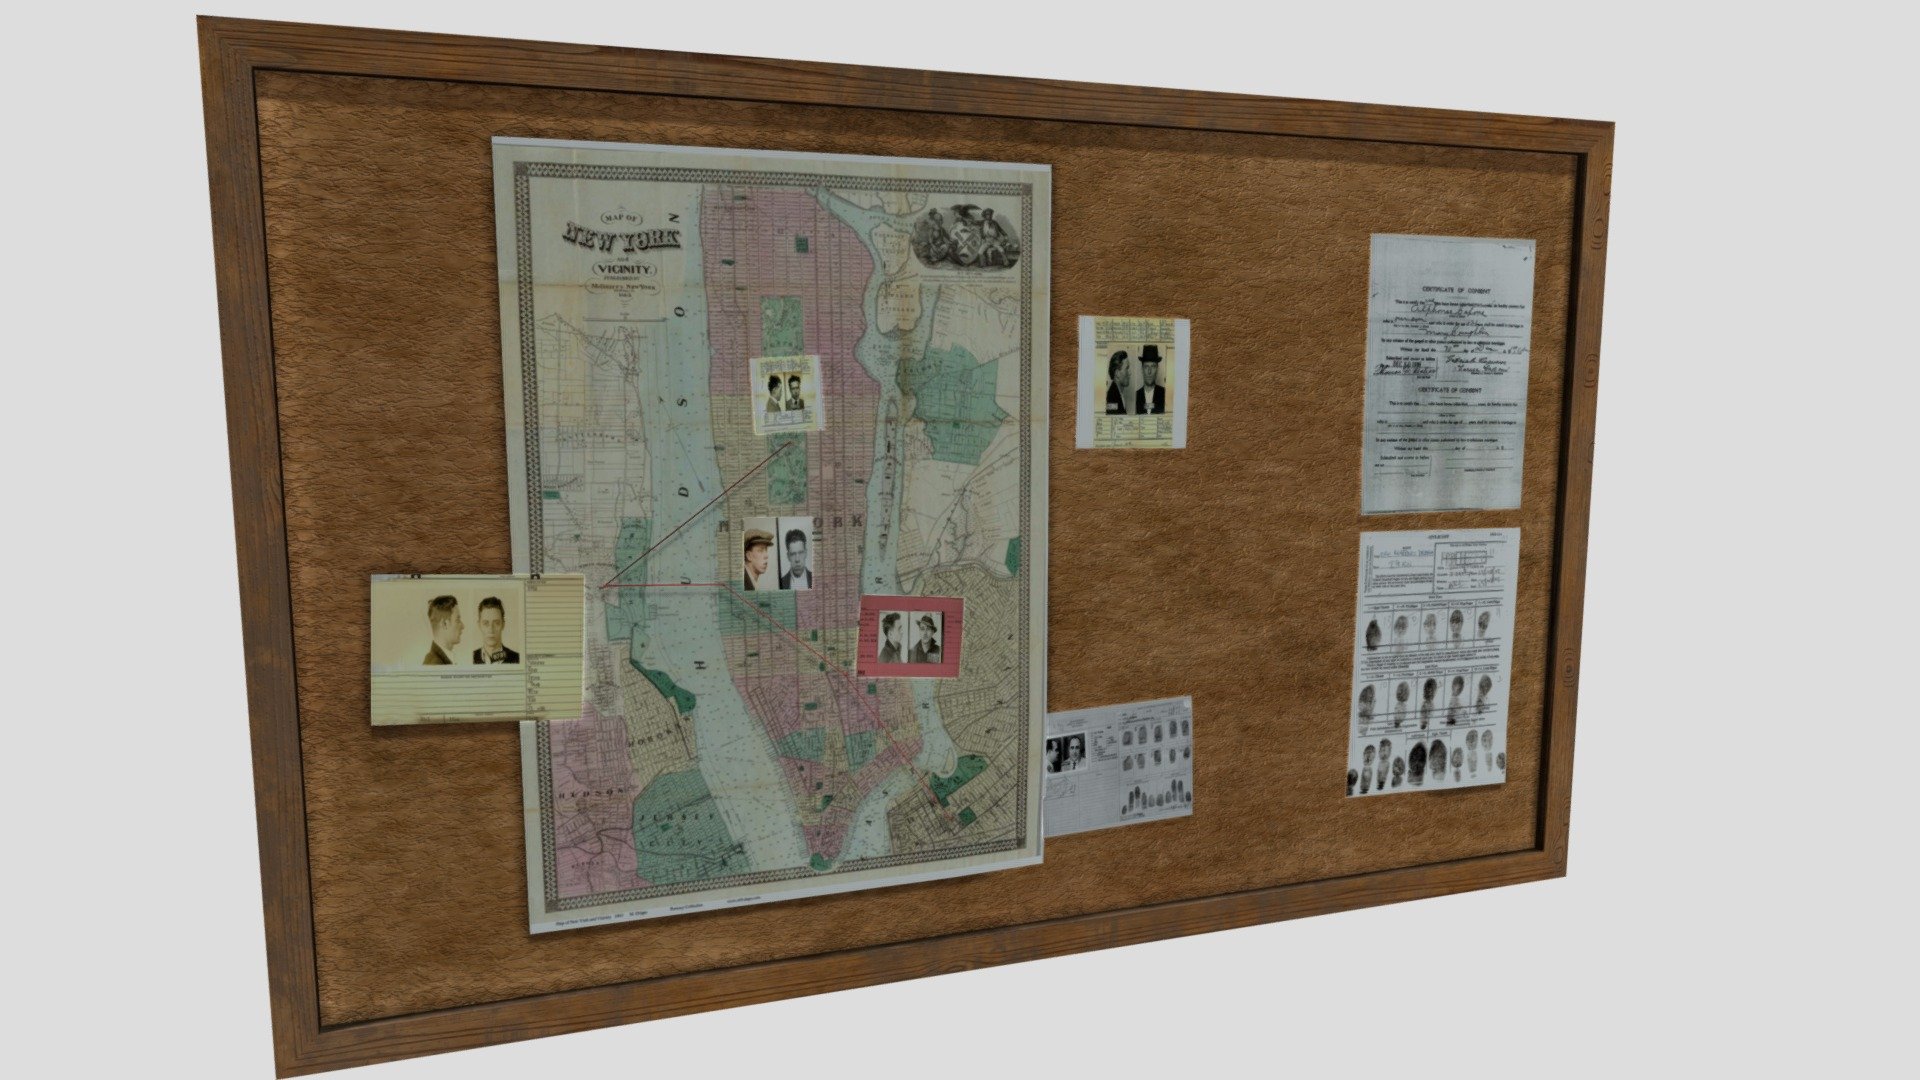 This is an investigation board found in a police station, Detective office, or P.I.'s office. This particular board centers around a string of activity encompassing New York City. 

PBR Mats. One UV channel 3d model